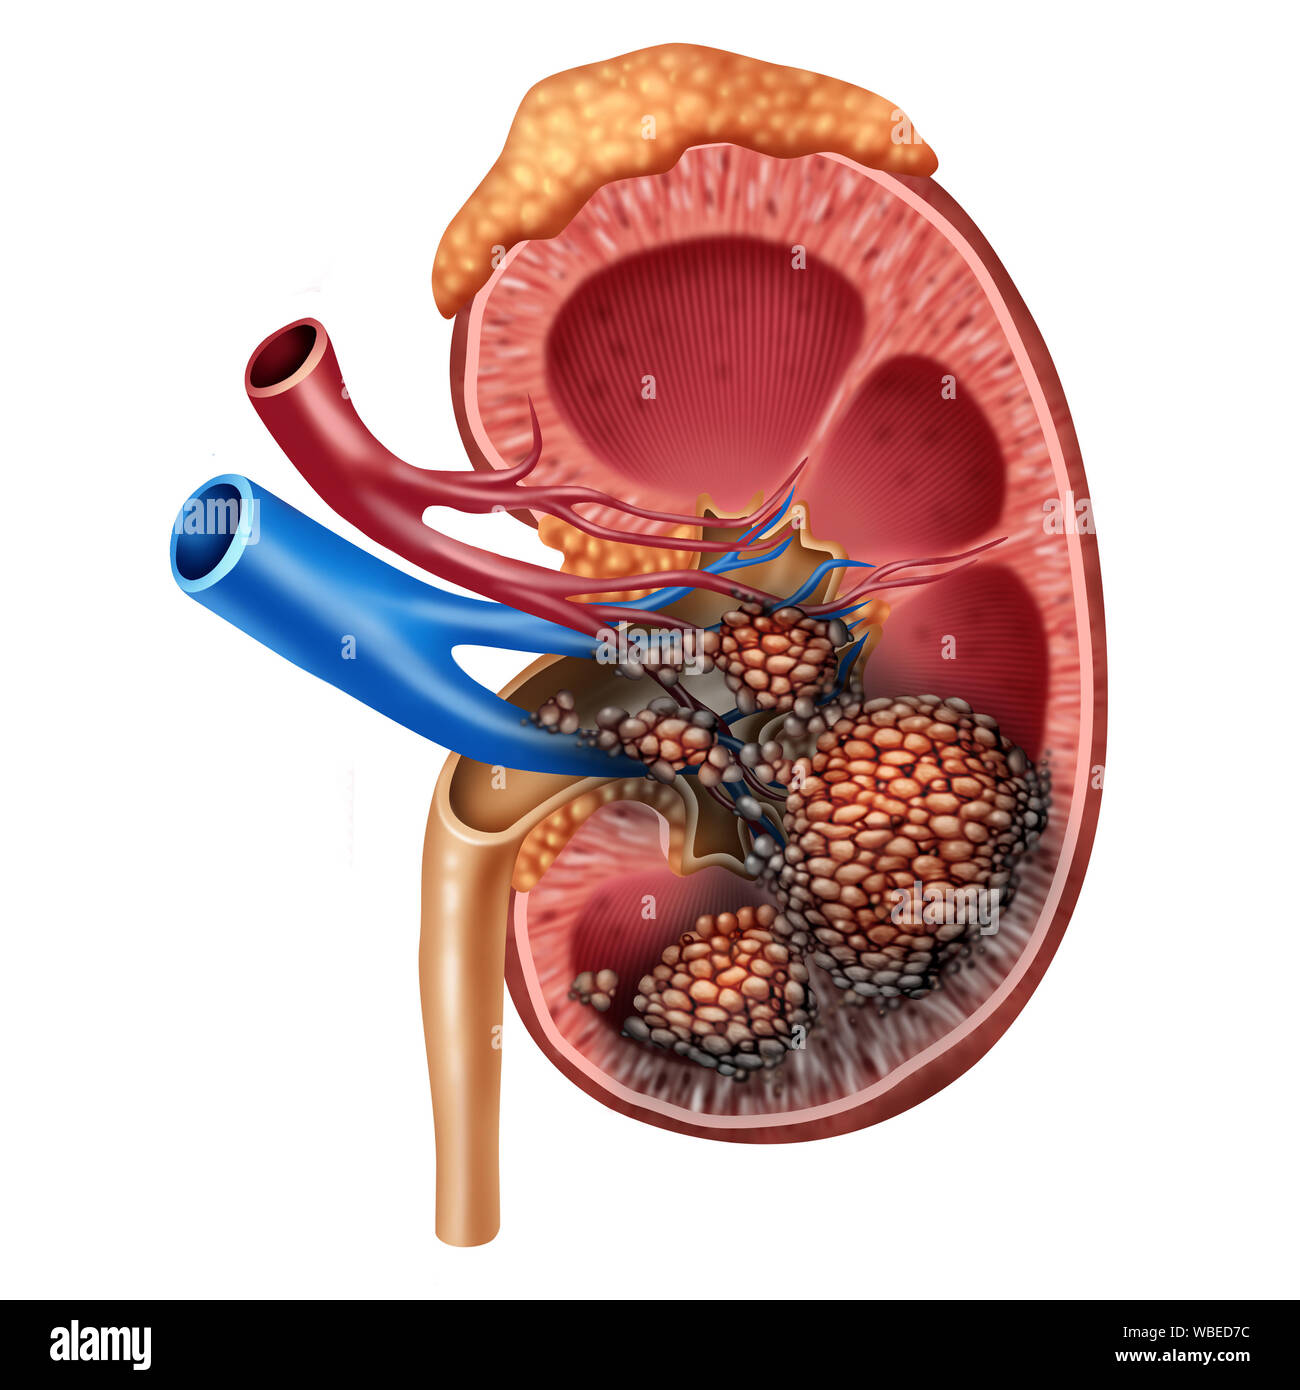 Human kidney cancer anatomy medical concept as cancerouse cells in a human body attacking the urinary system and renal anatomy. Stock Photo